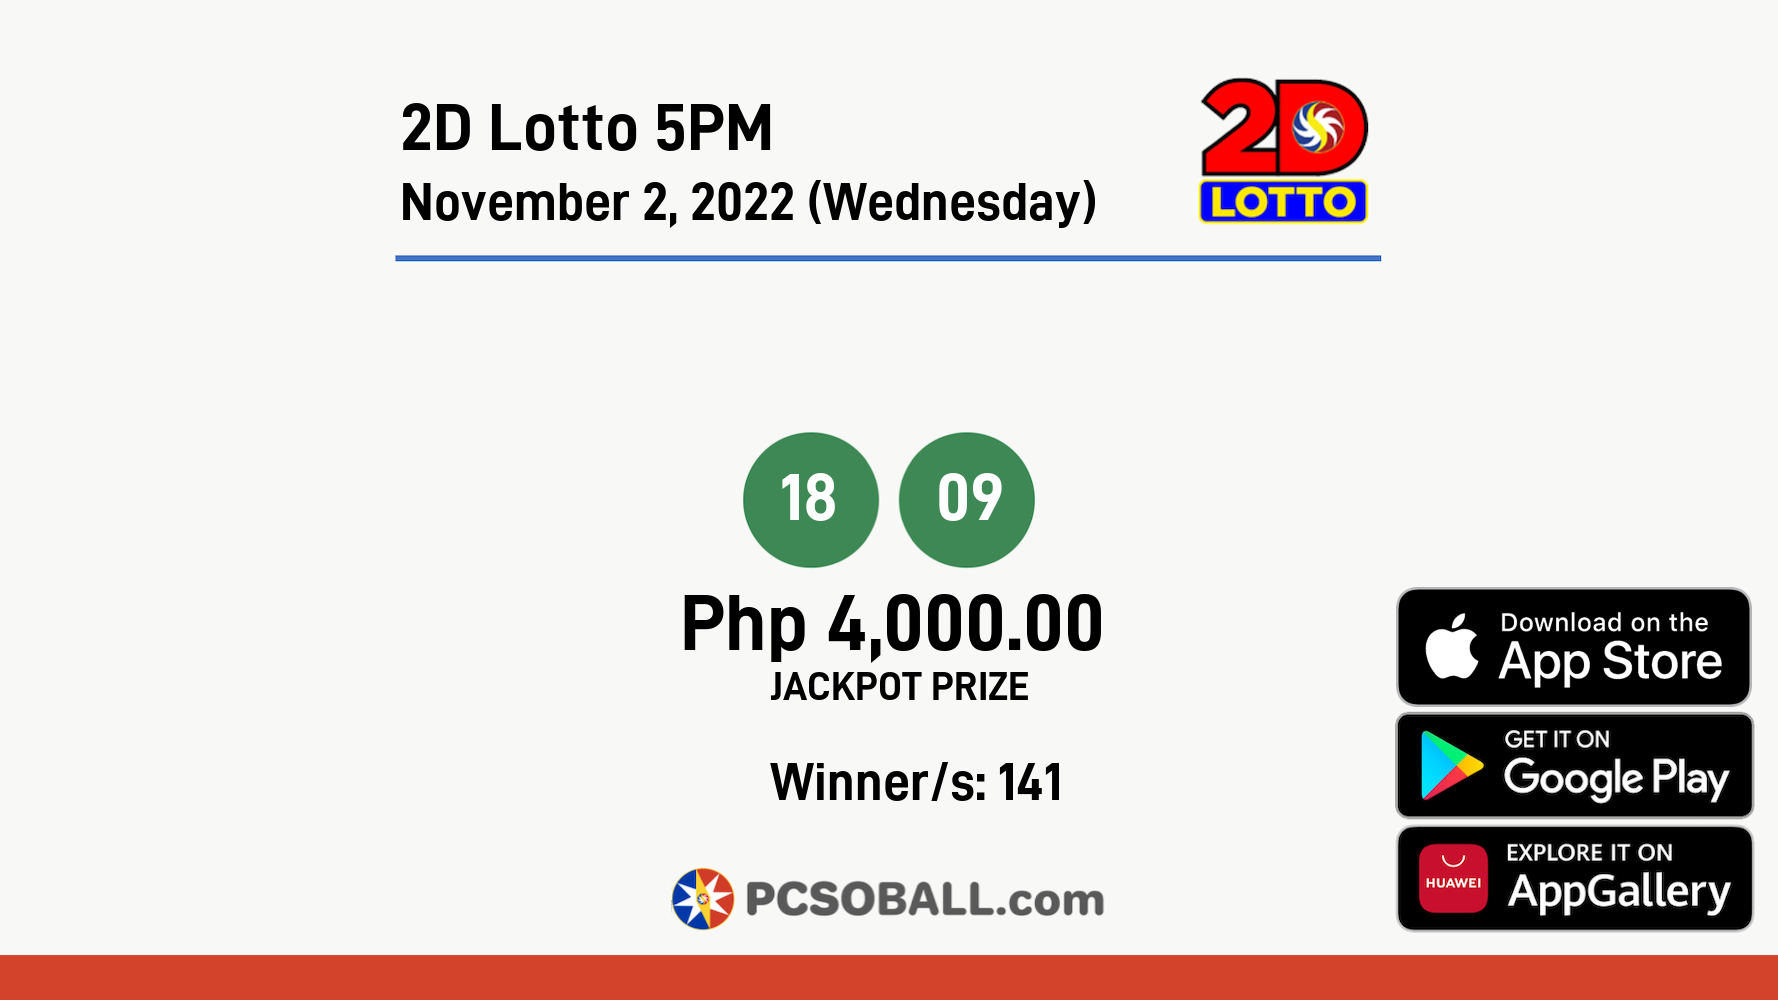 2D Lotto 5PM November 2, 2022 (Wednesday) Result